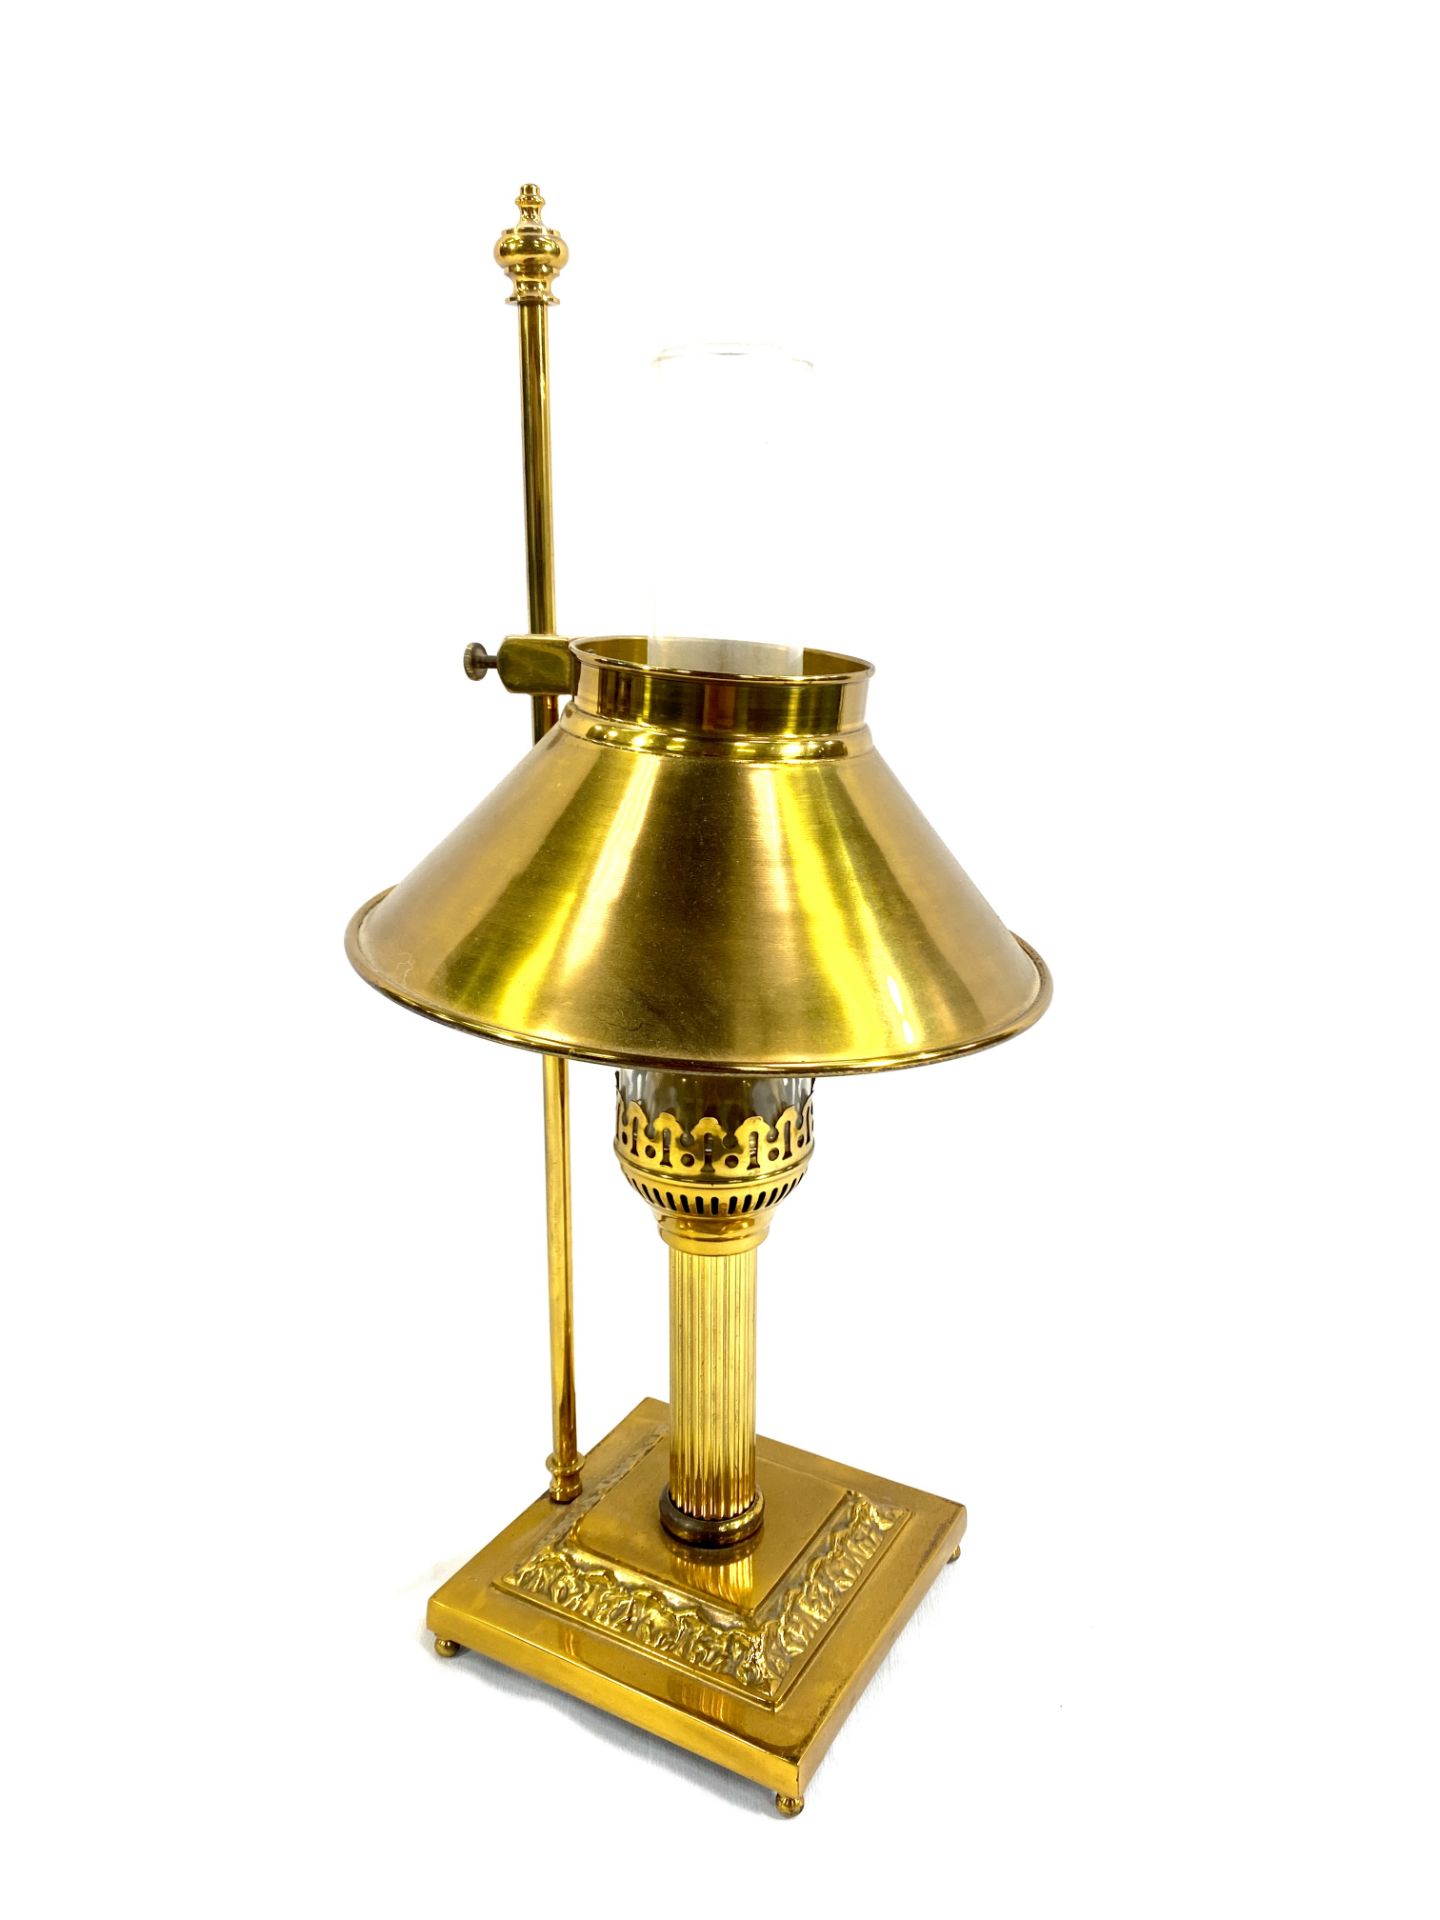 Brass table lamp in the style of a gas lamp - Image 3 of 3